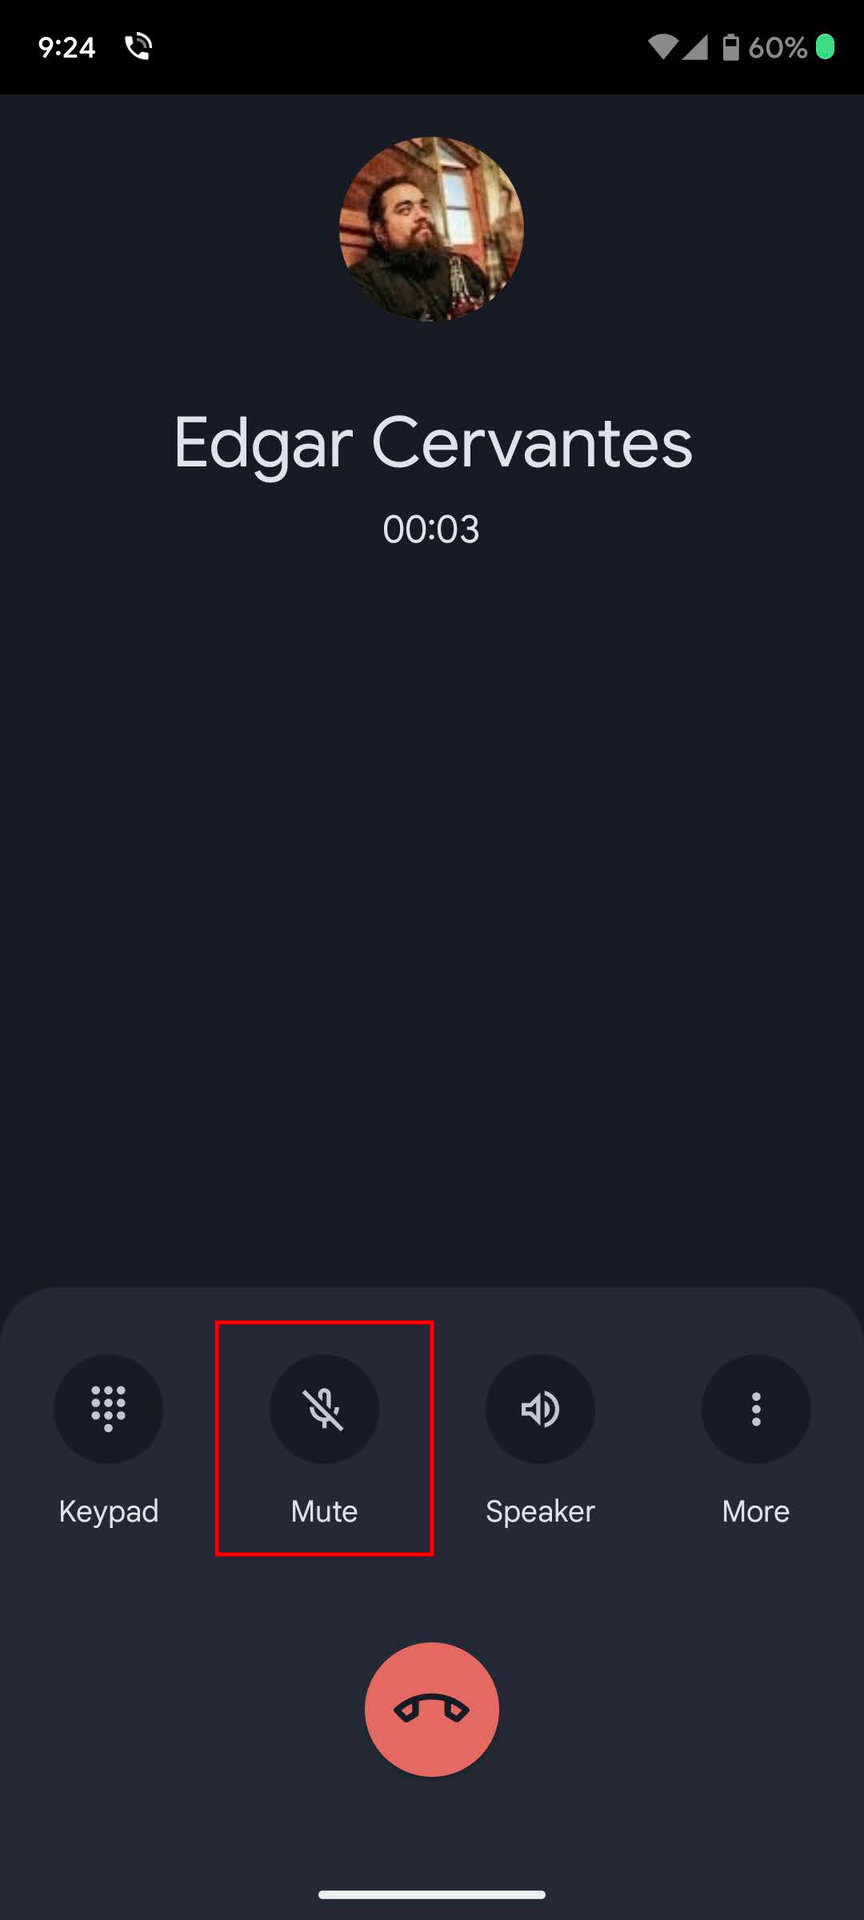 How to mute or unmute your microphone during a call (1)